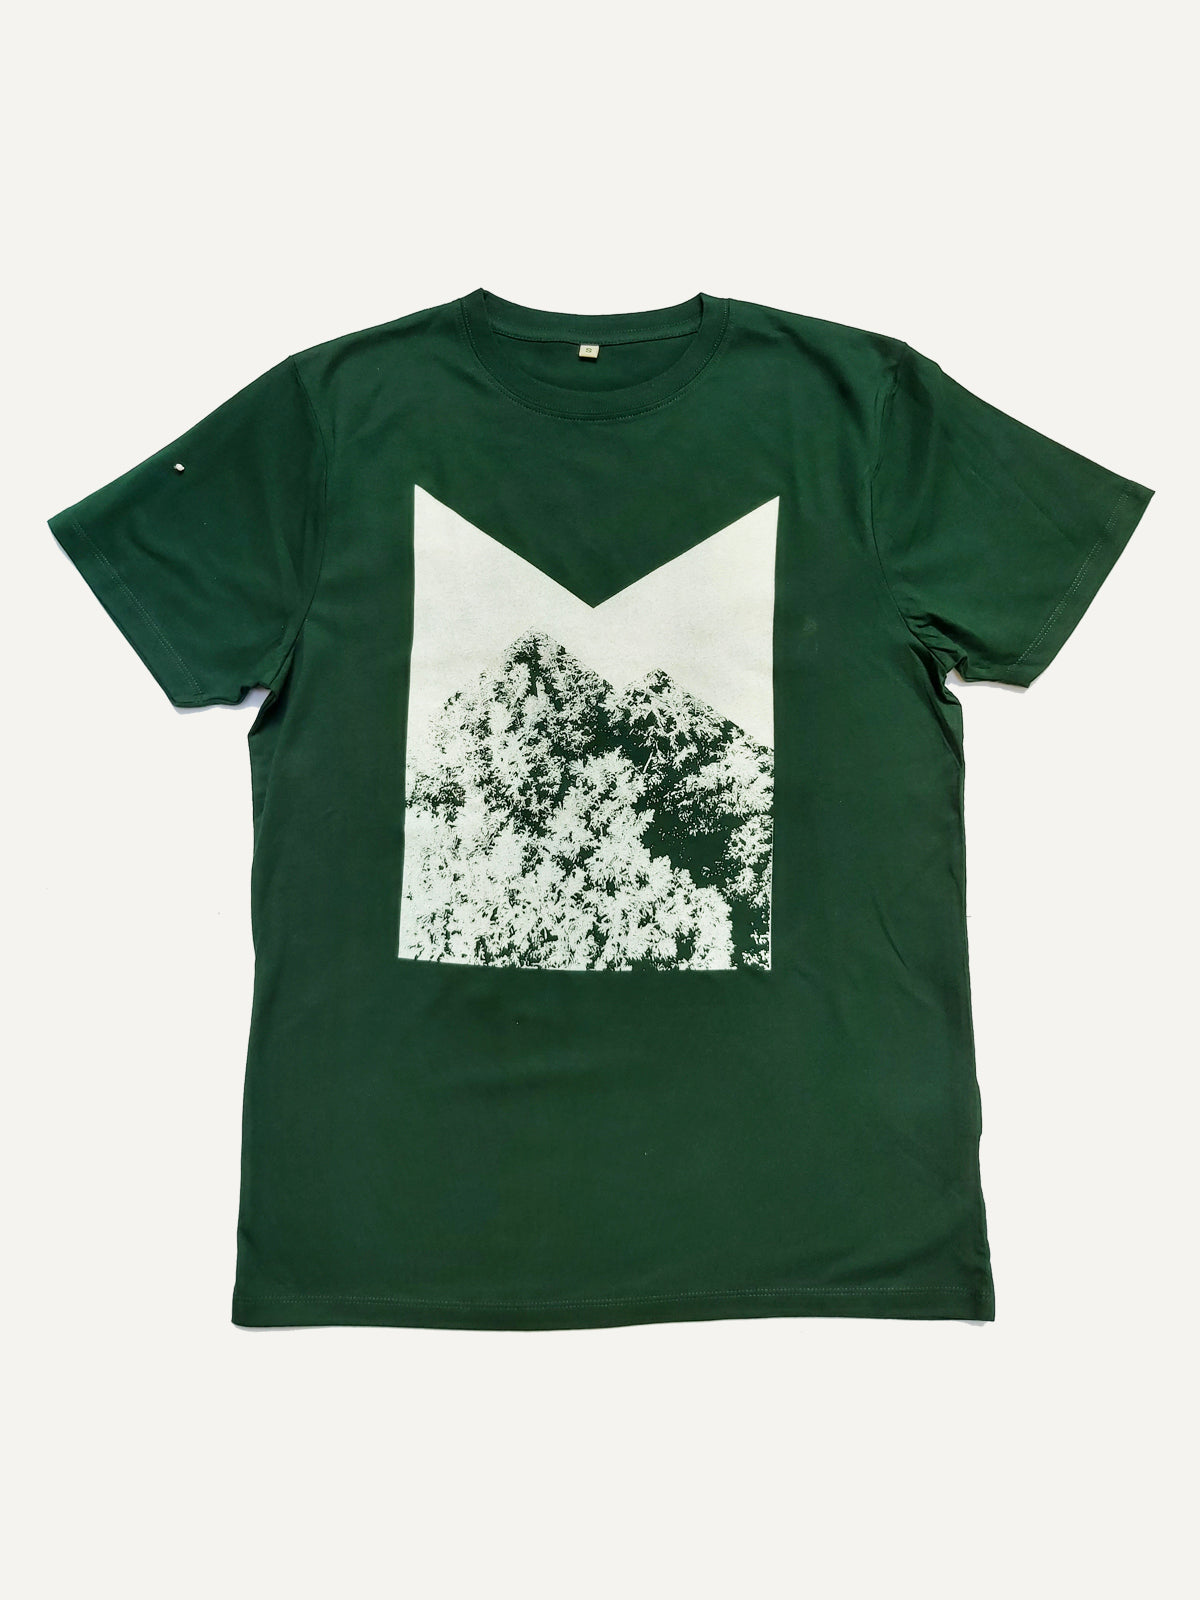 Green men's t-shirt with pattern